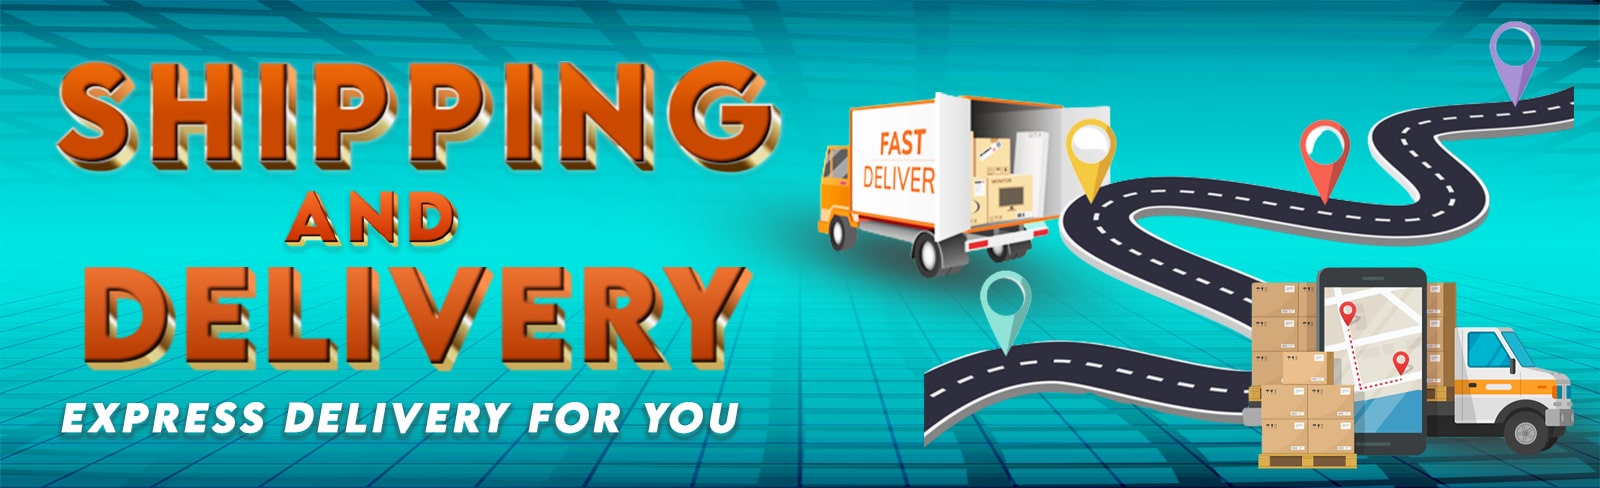 Shipping And Delivery Desktop Banner